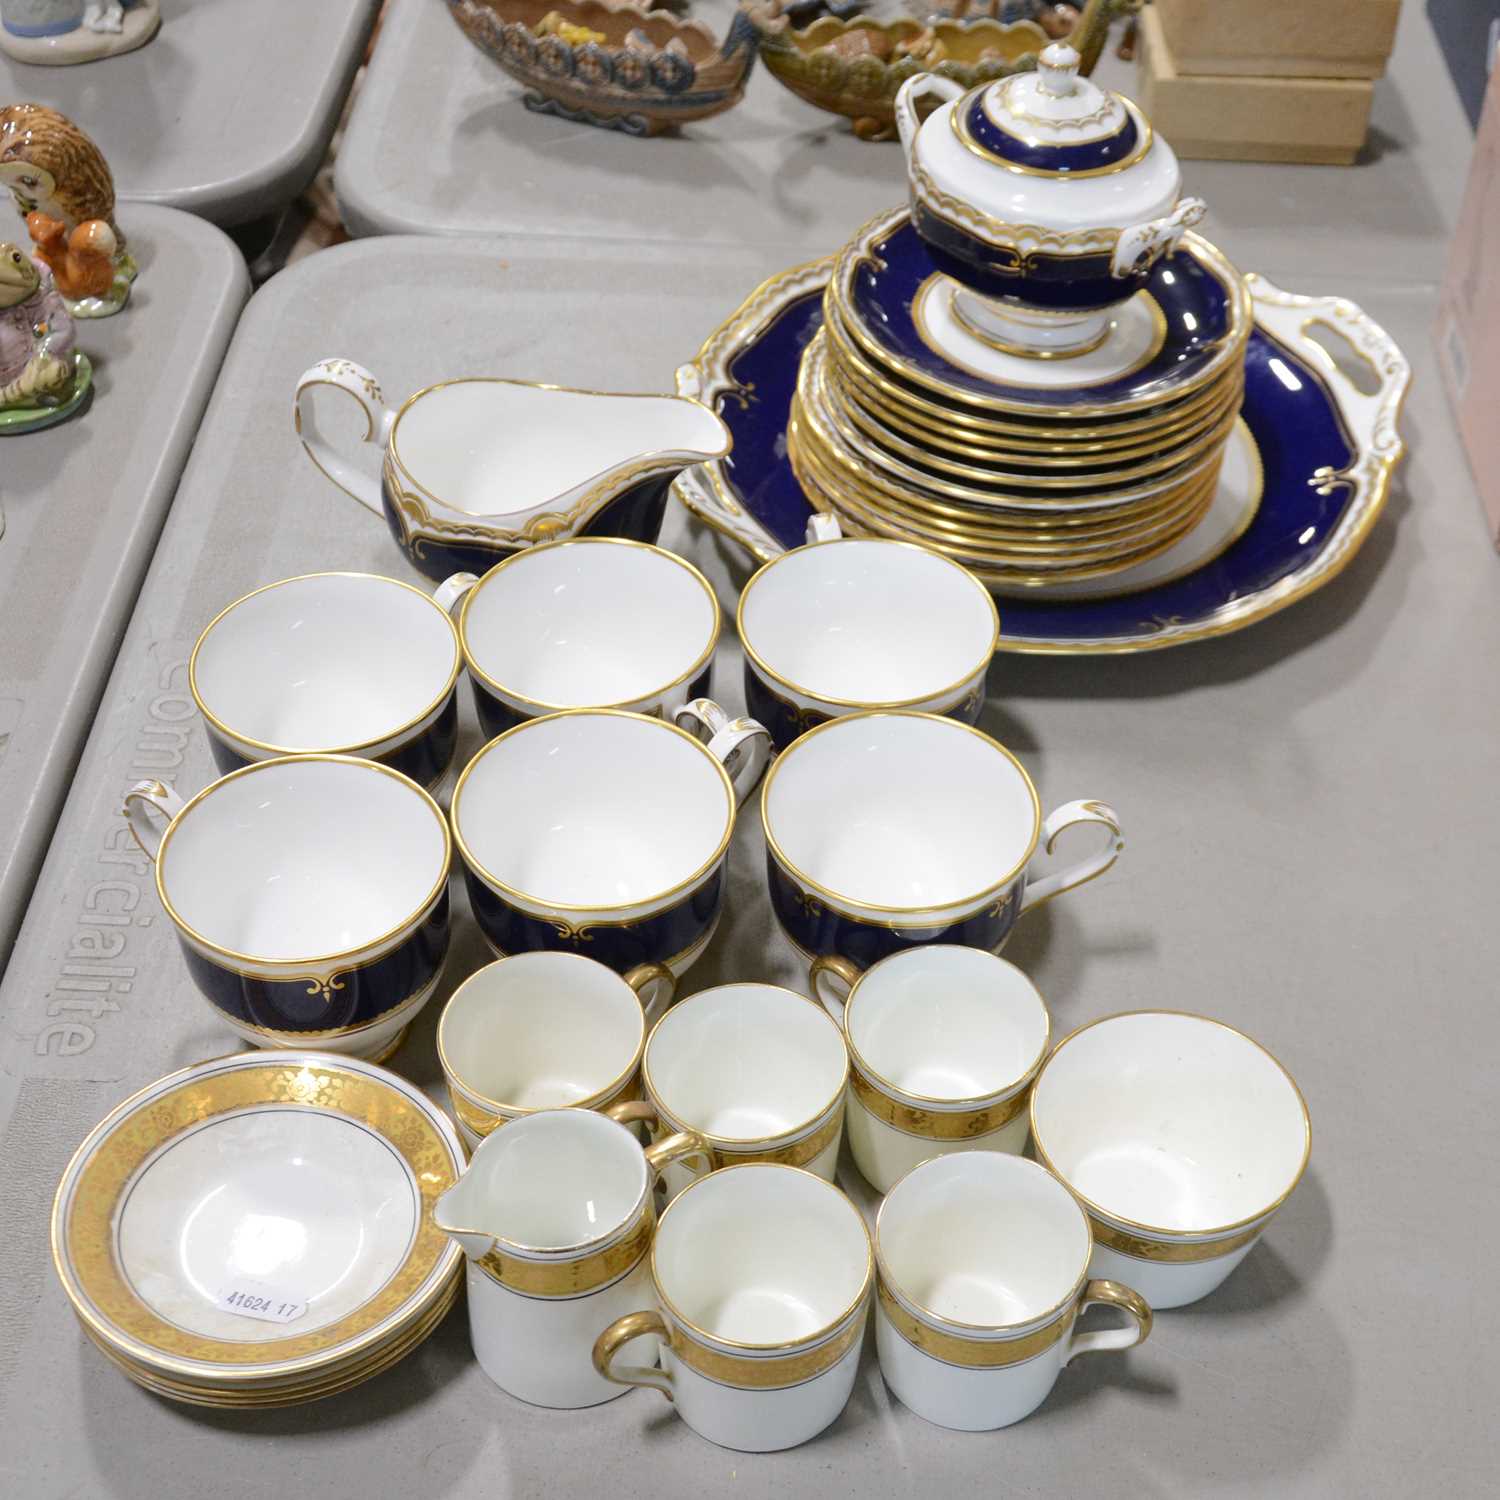 Royal Worcester 'Diplomat' pattern tea service, and another part coffee service - Image 2 of 2